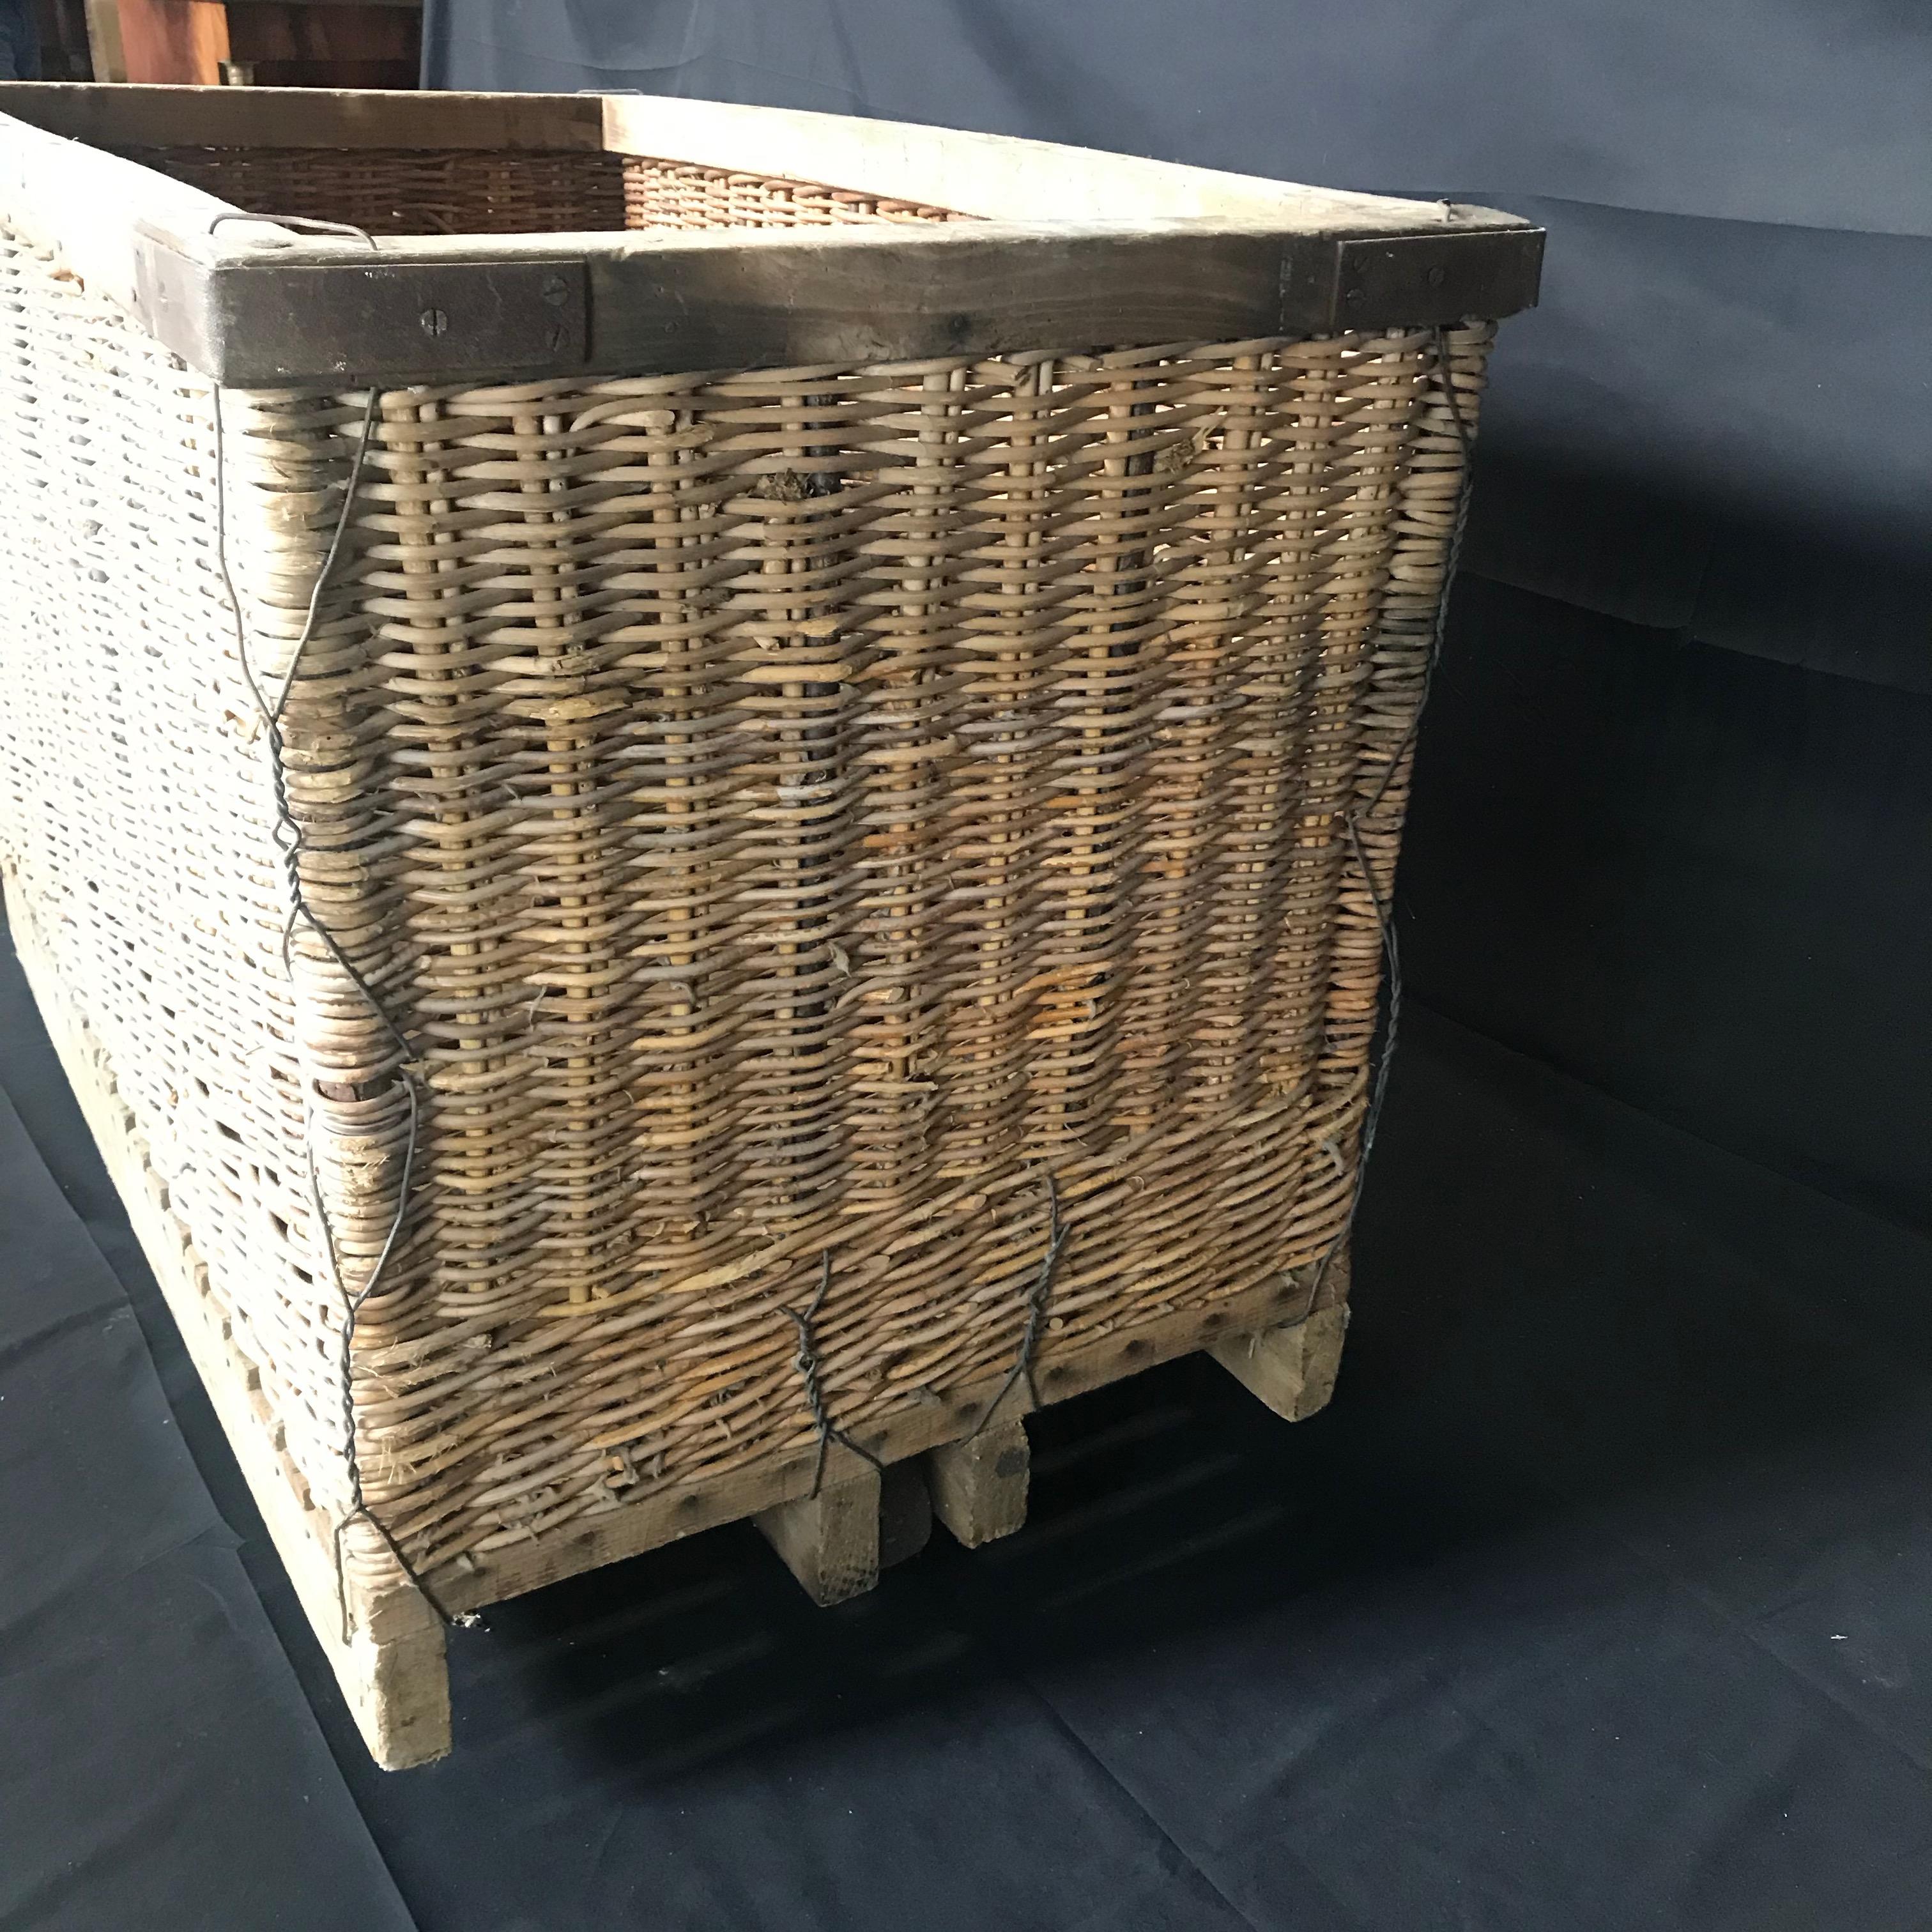 Early 20th Century French Large Boulangerie Industrial Woven Cart Basket on Wheels